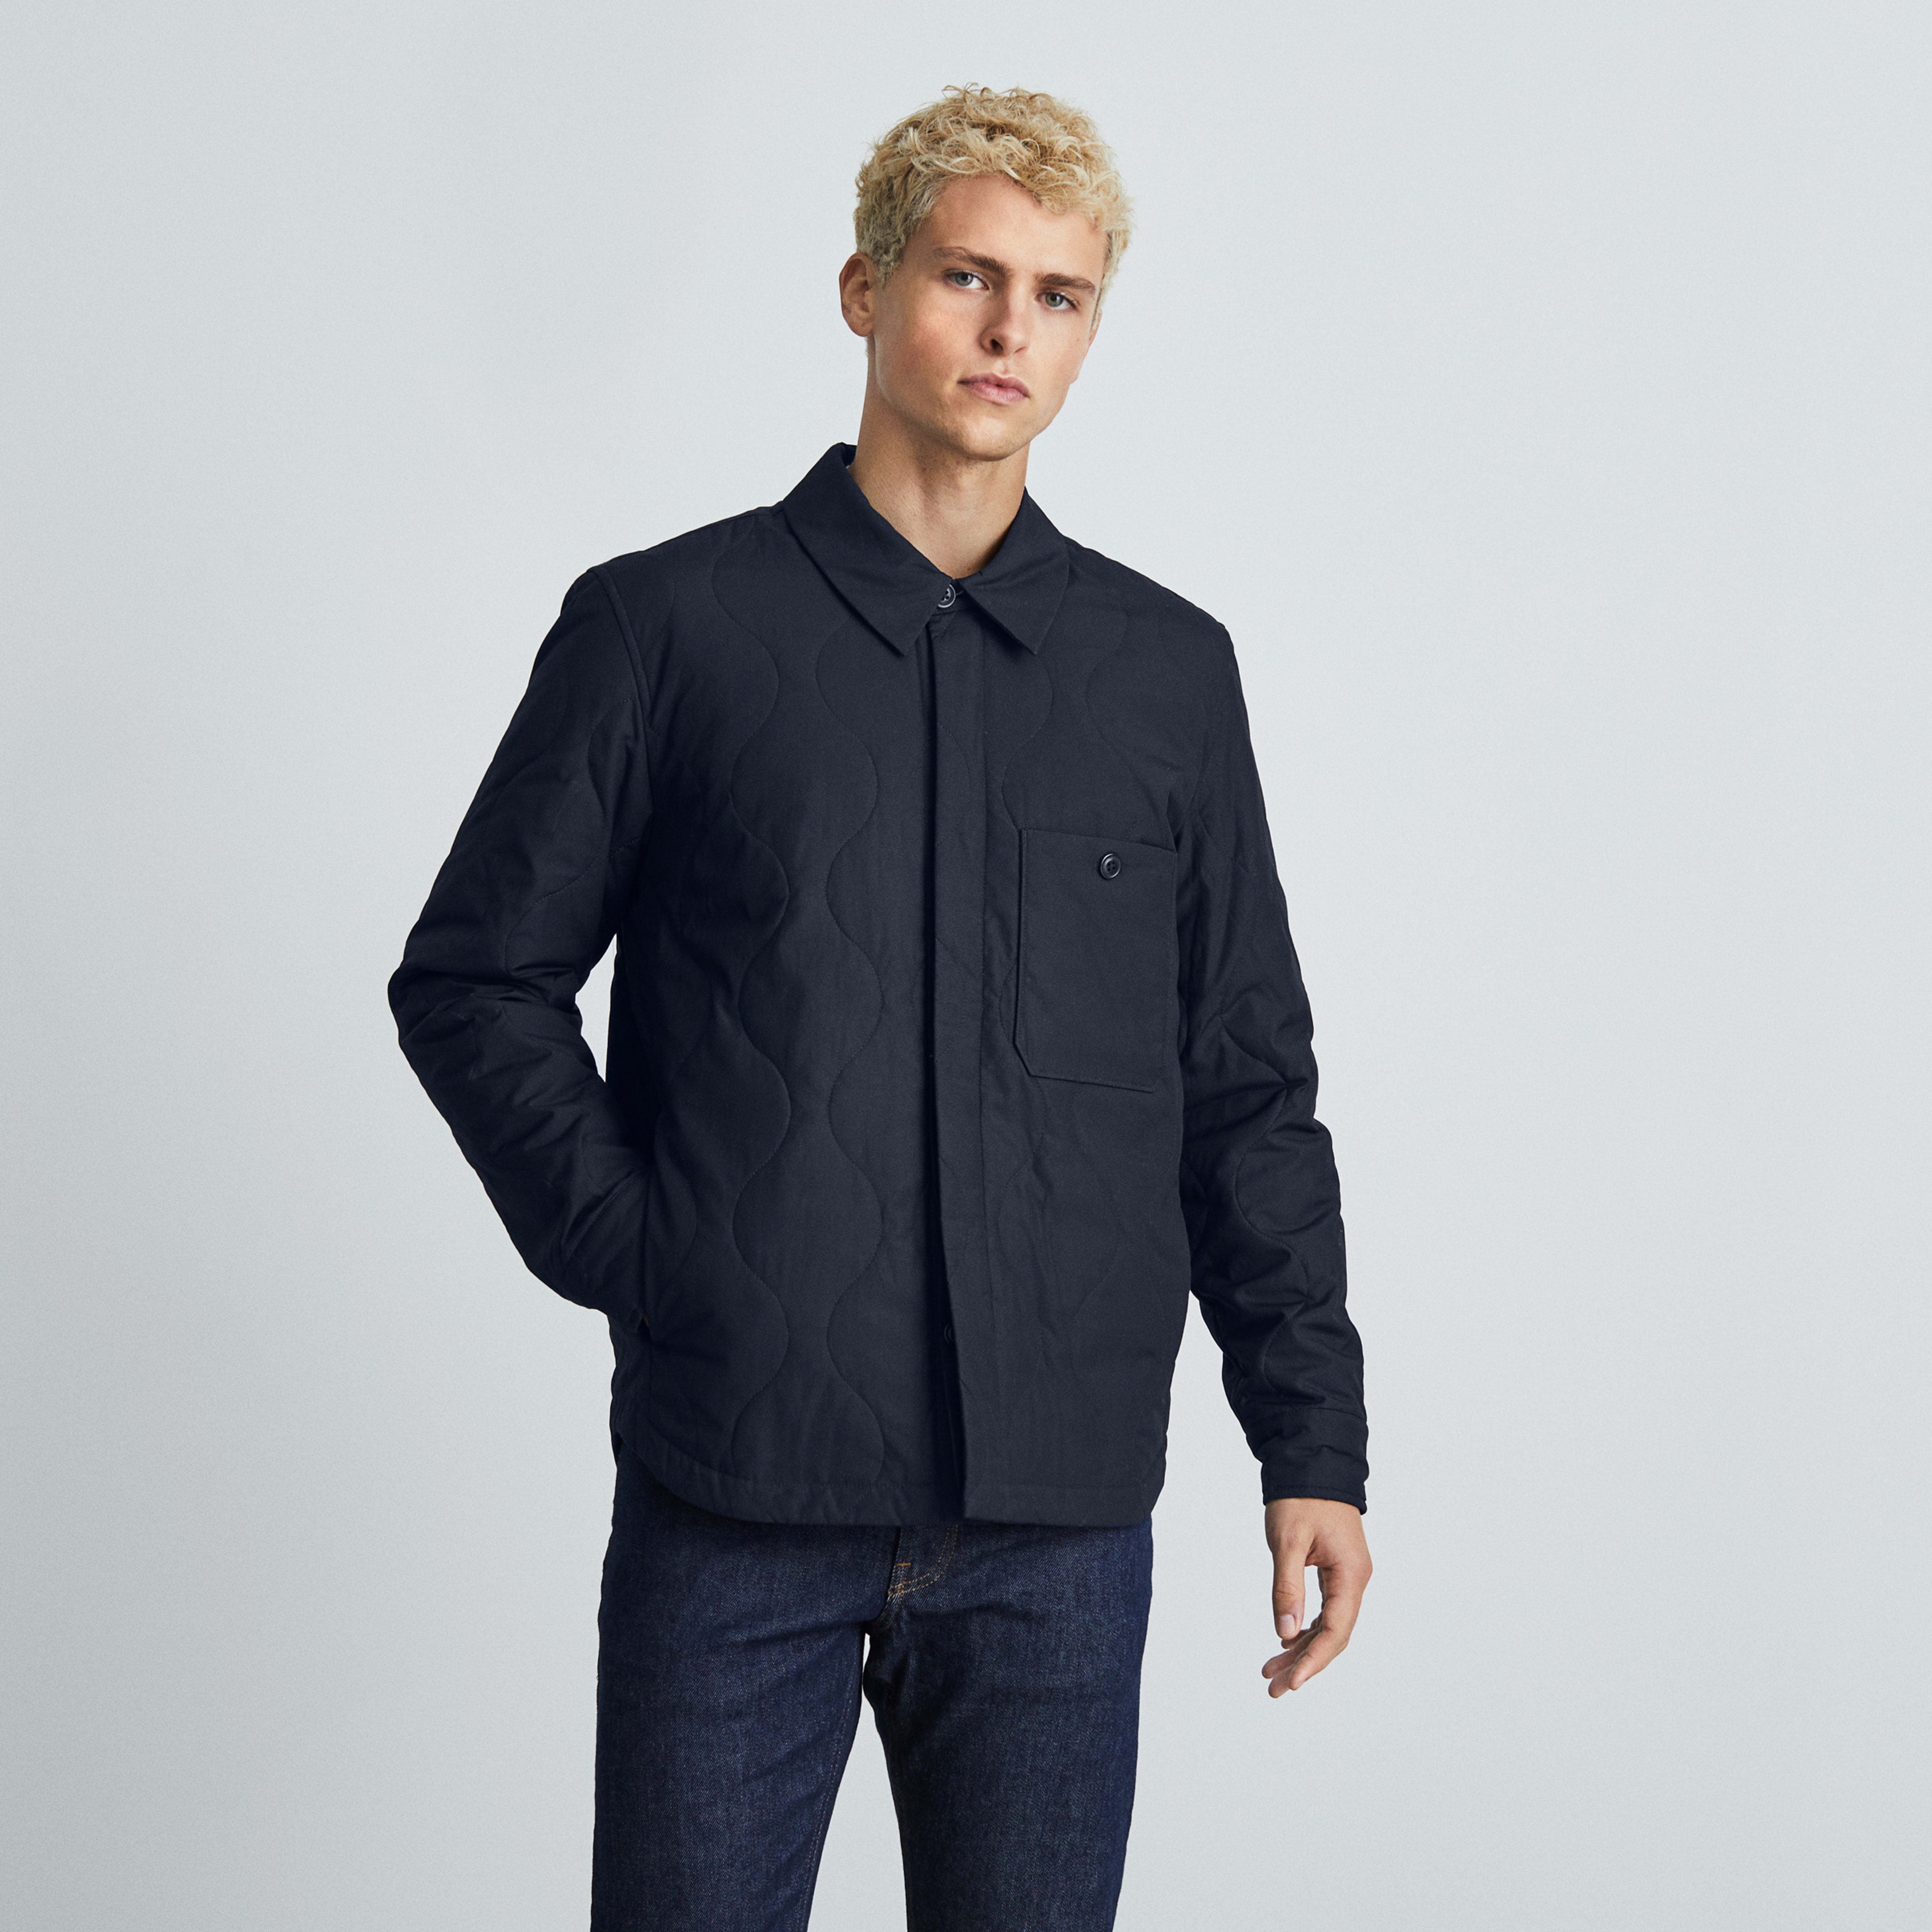 Give the Gift of Well-Made Basics From Everlane - InsideHook